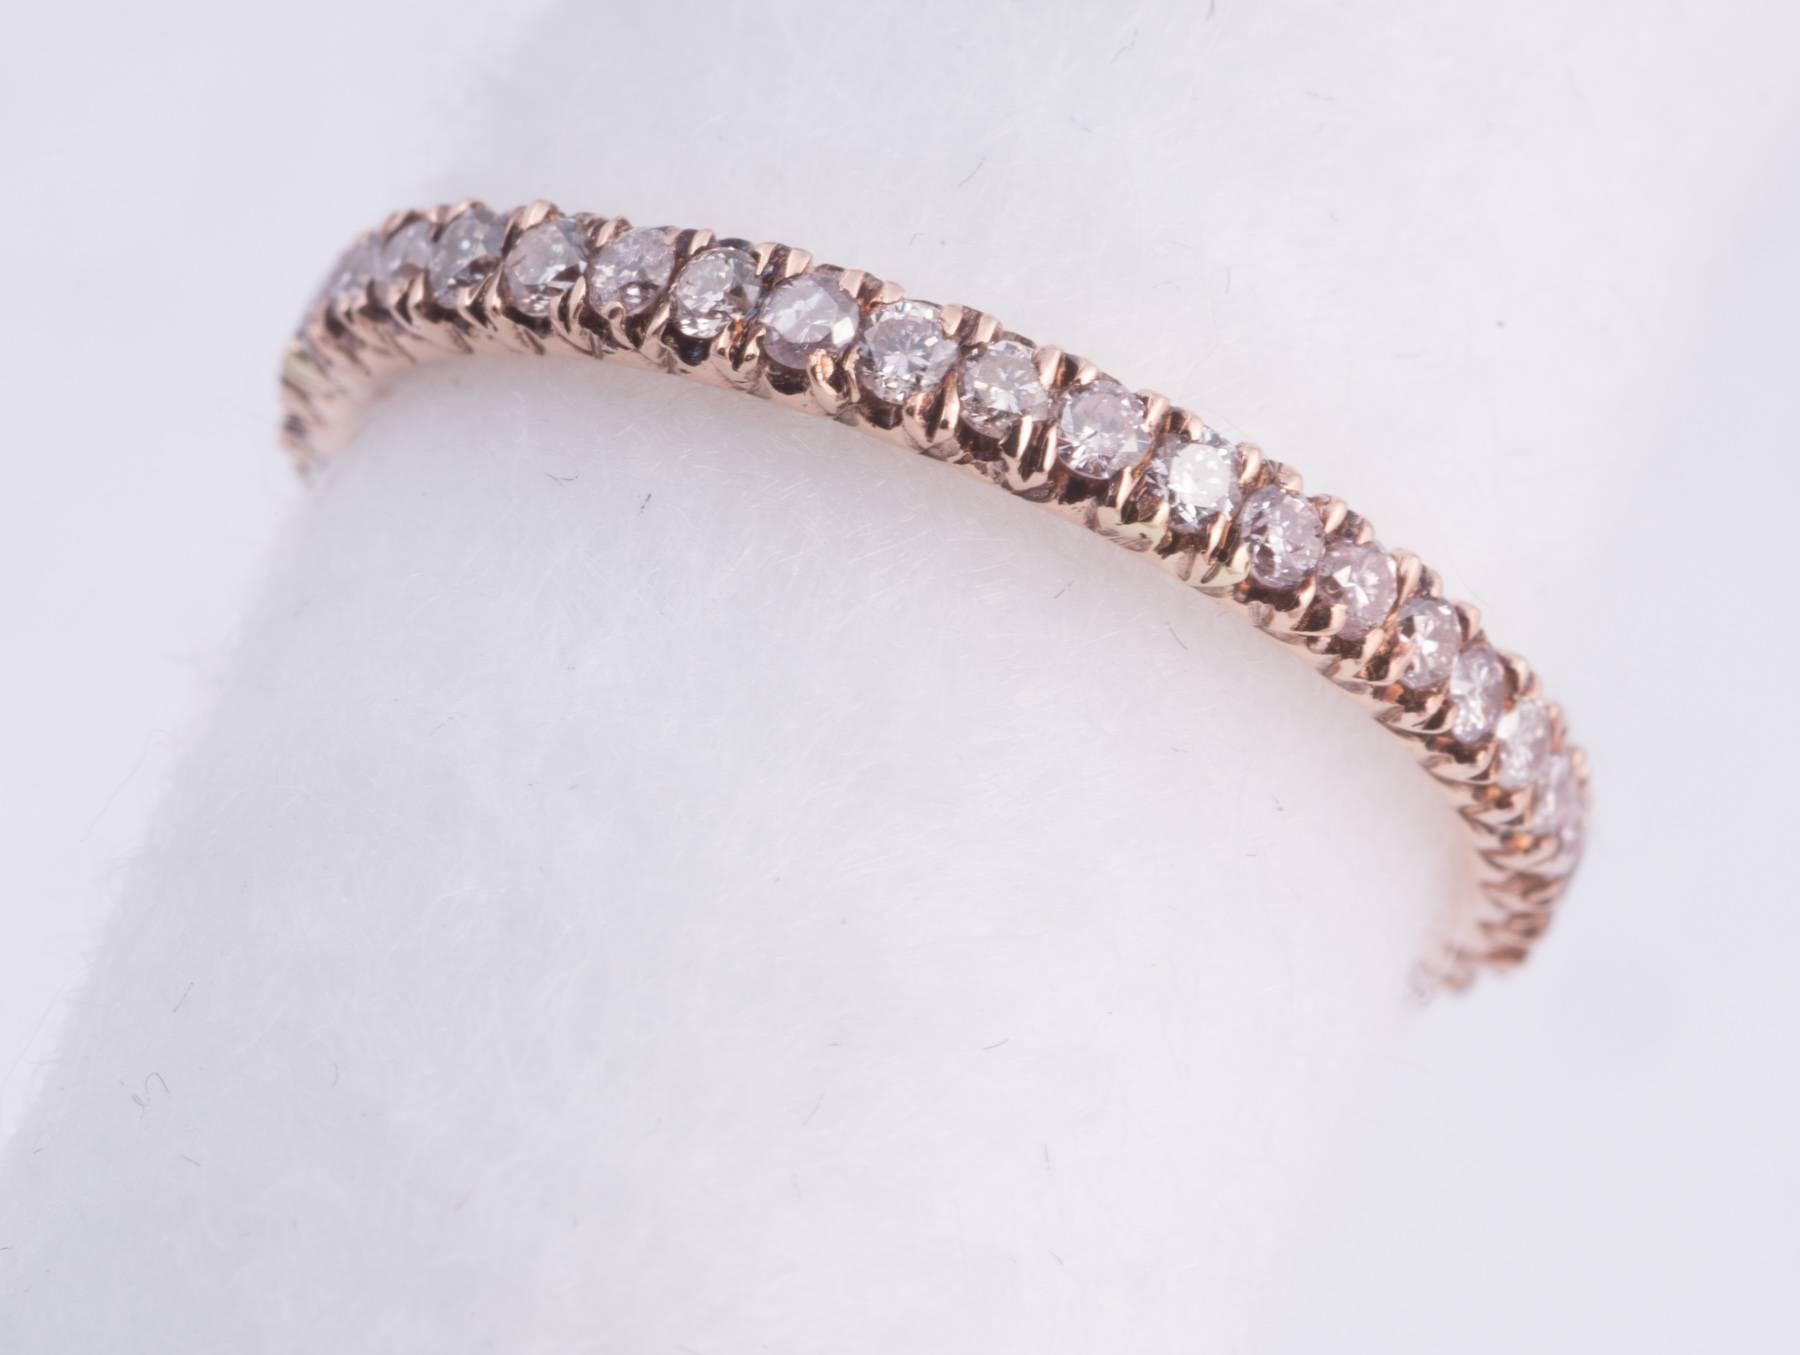 Fabulous pink diamond band with natural color pink diamonds and VS clarity. The band is set in 18k rose gold. The diamonds weigh .65cts. Ring size 7.5. The band is 2.3mm wide.